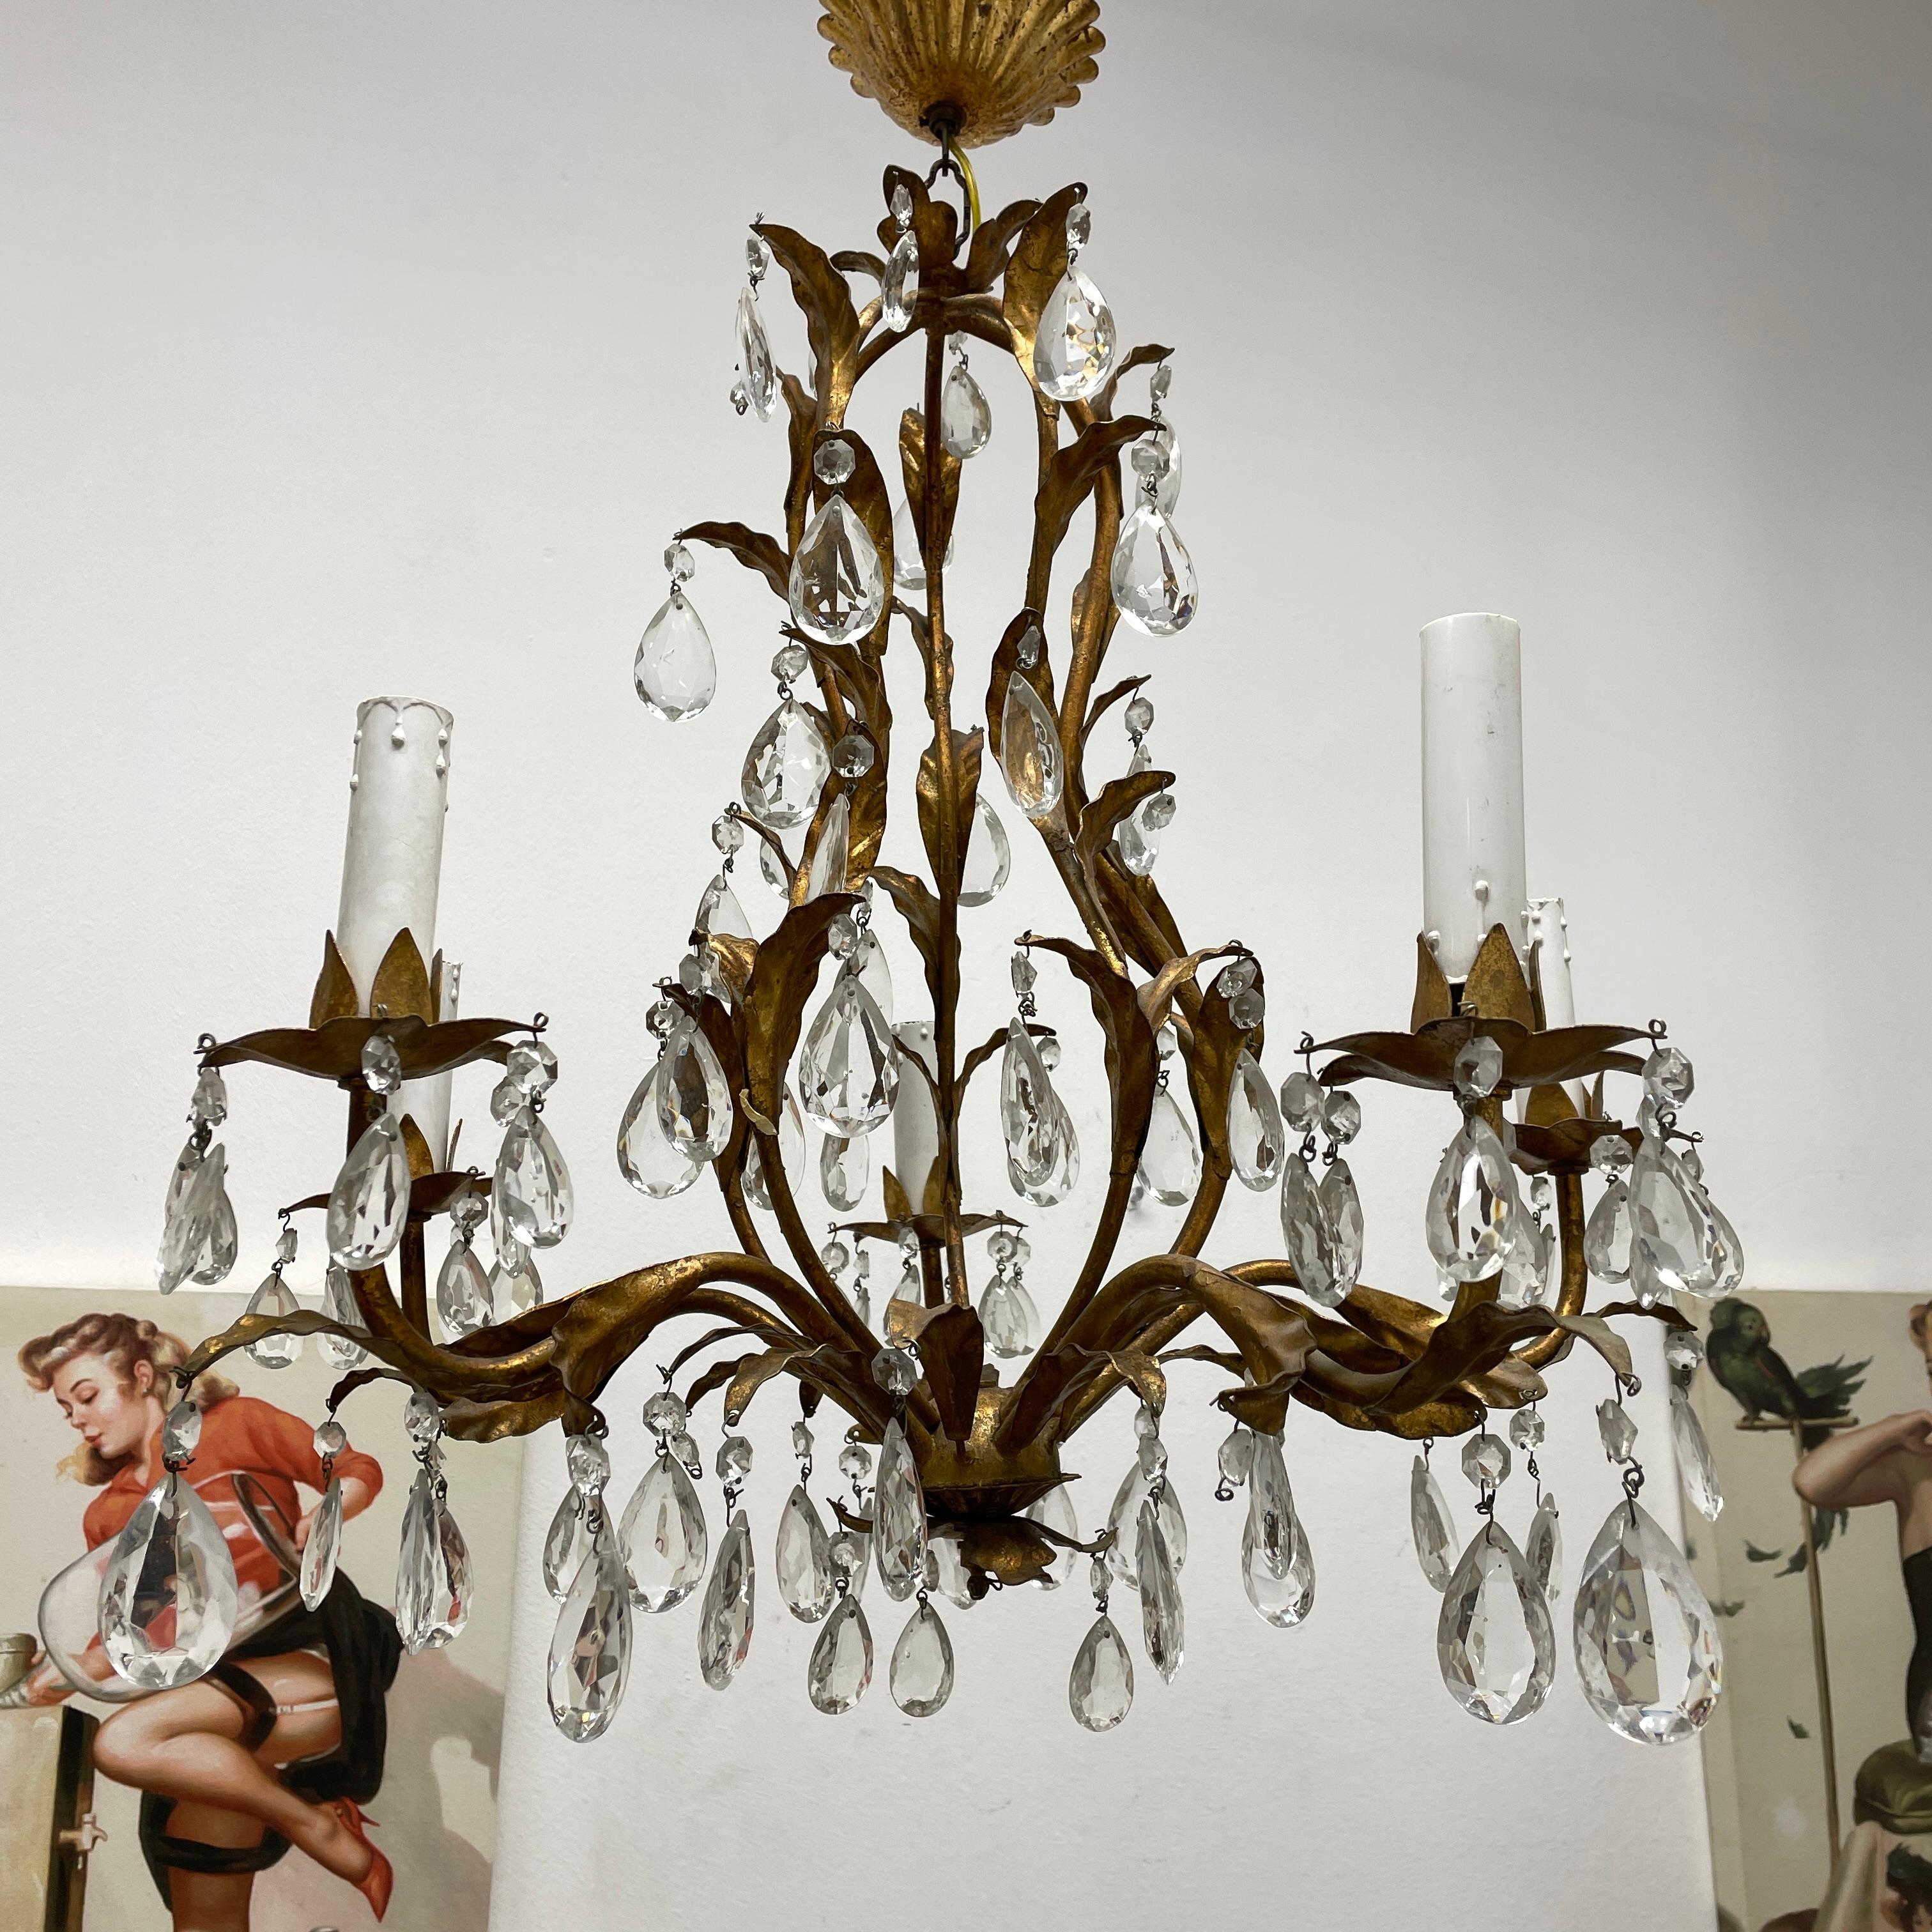 Add a touch of opulence to your home with this charming chandelier! Perfect gilt Metal and crystal glass to enhance any chic or eclectic home. We'd love to see it hanging in an entry hall or in a Living / Dinning room area. Built in the 1960s,